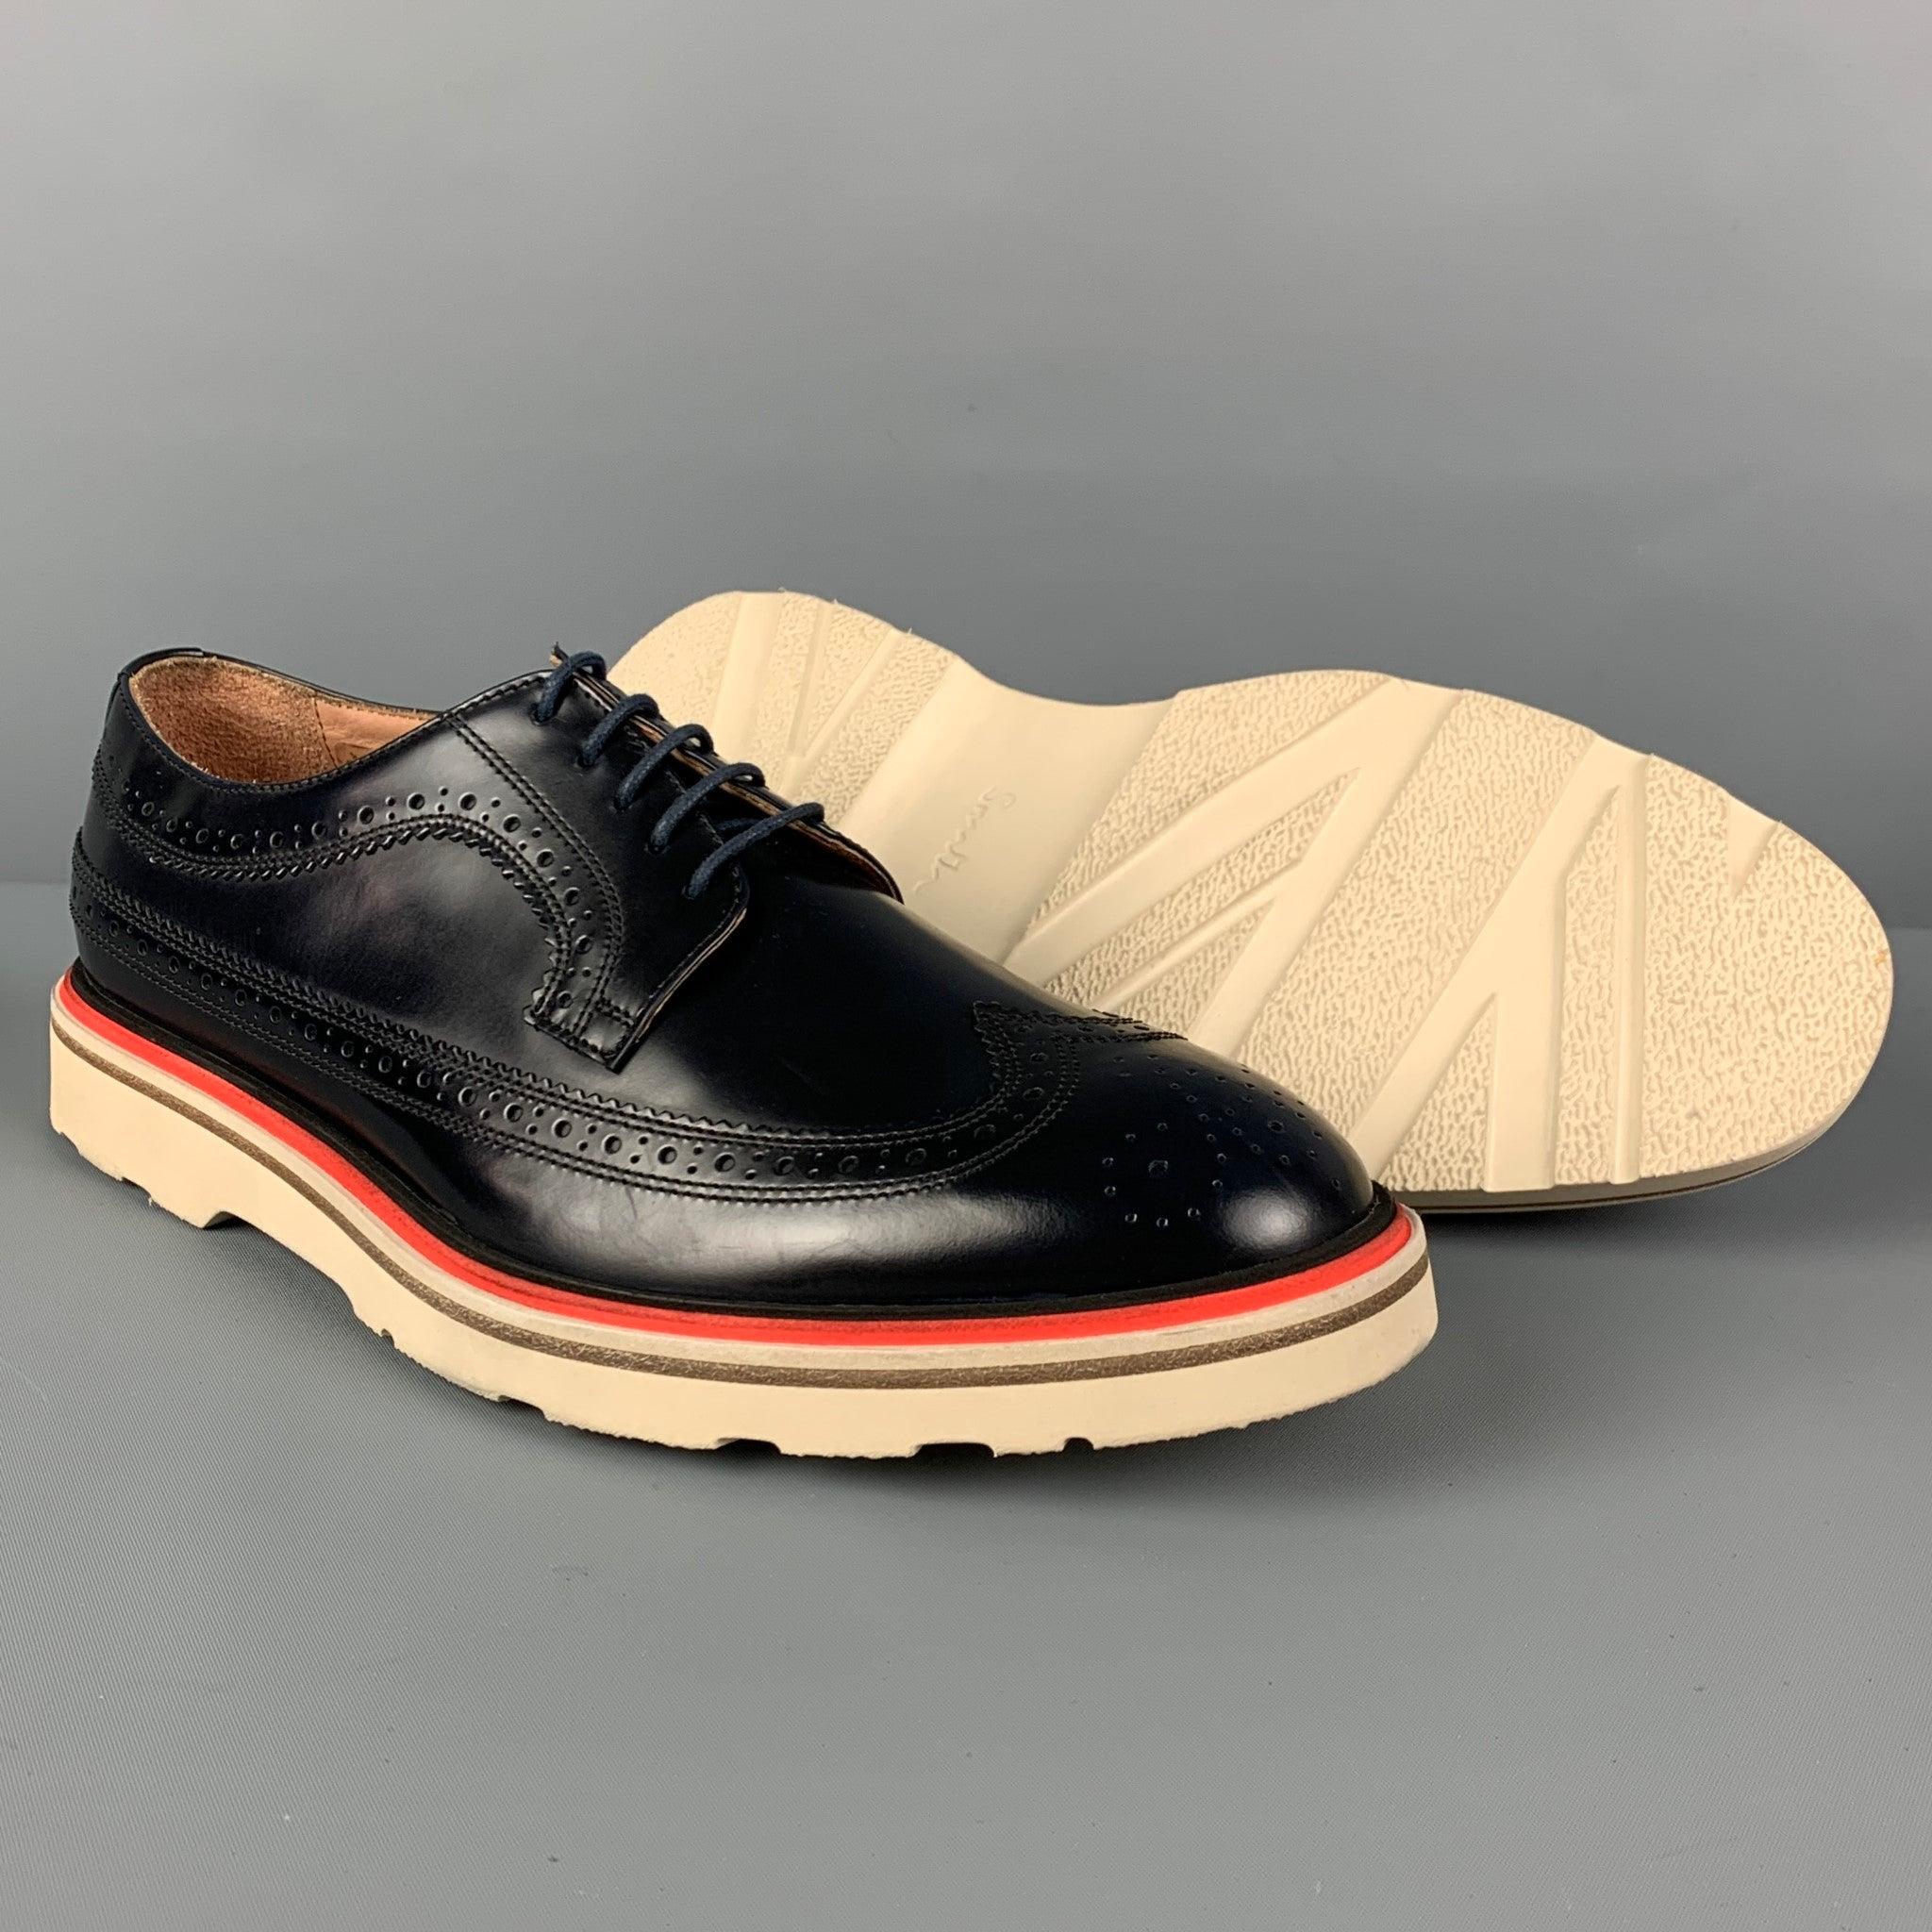 PAUL SMITH Size 7.5 Navy White Perforated Leather Wingtip Lace Up Shoes In Good Condition For Sale In San Francisco, CA